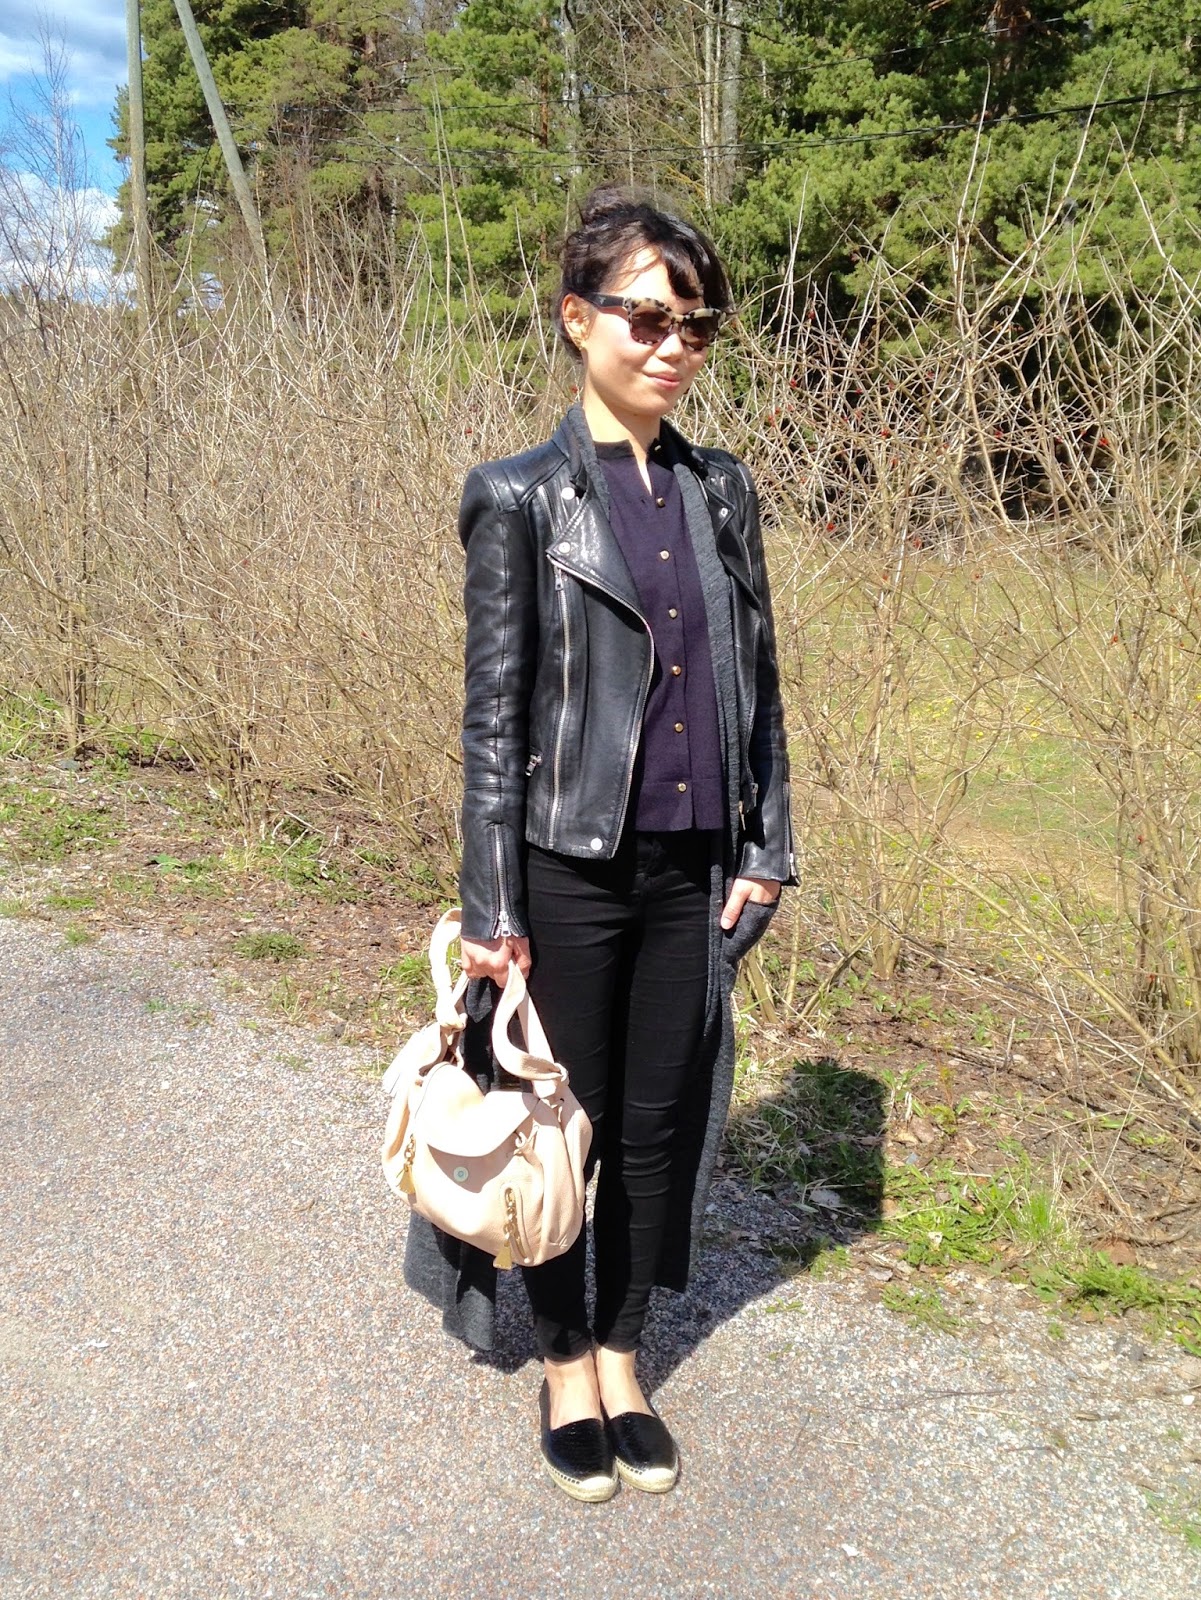 plyndringer 945 bassin Fashion Fun! YSL Espadrilles on Picnic Day, Outfit of May | Mindy Yuan